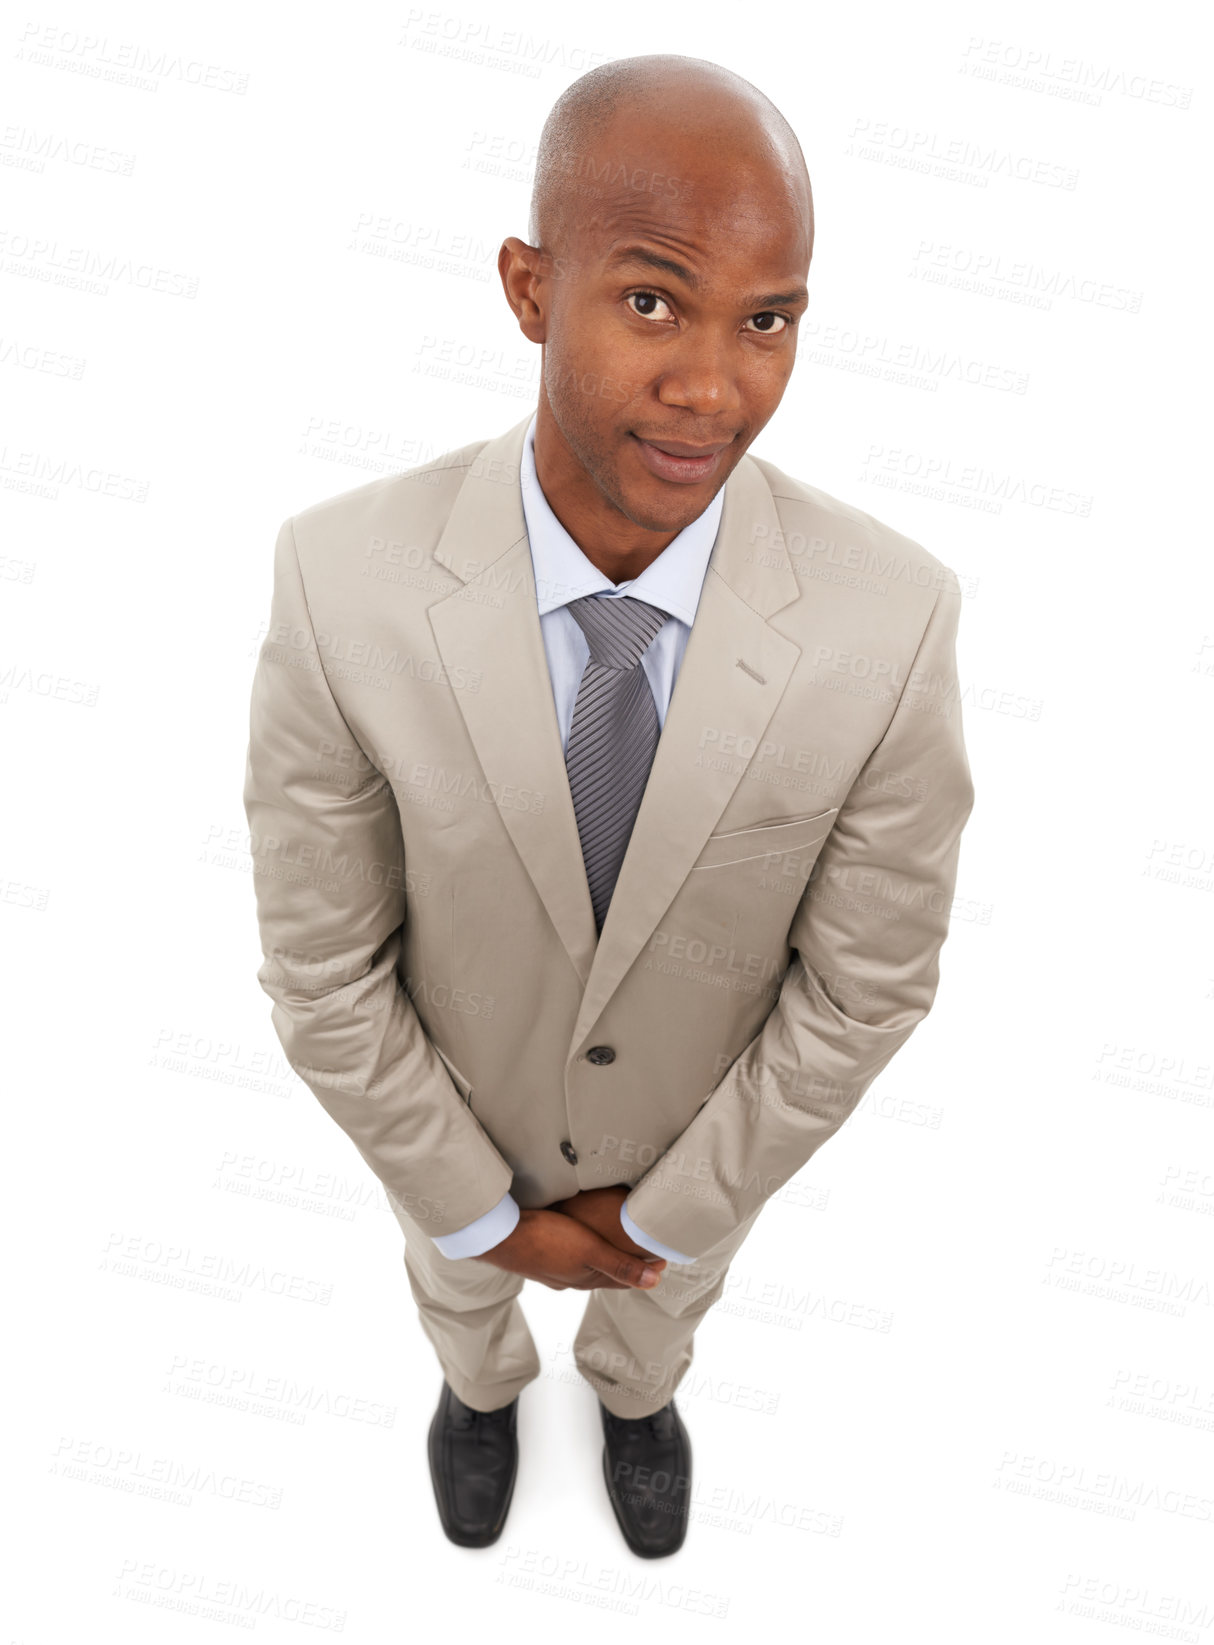 Buy stock photo Studio portrait, top view and professional black man for business services, career work or realtor job experience. Eyebrow raise, entrepreneur and African real estate agent on white background